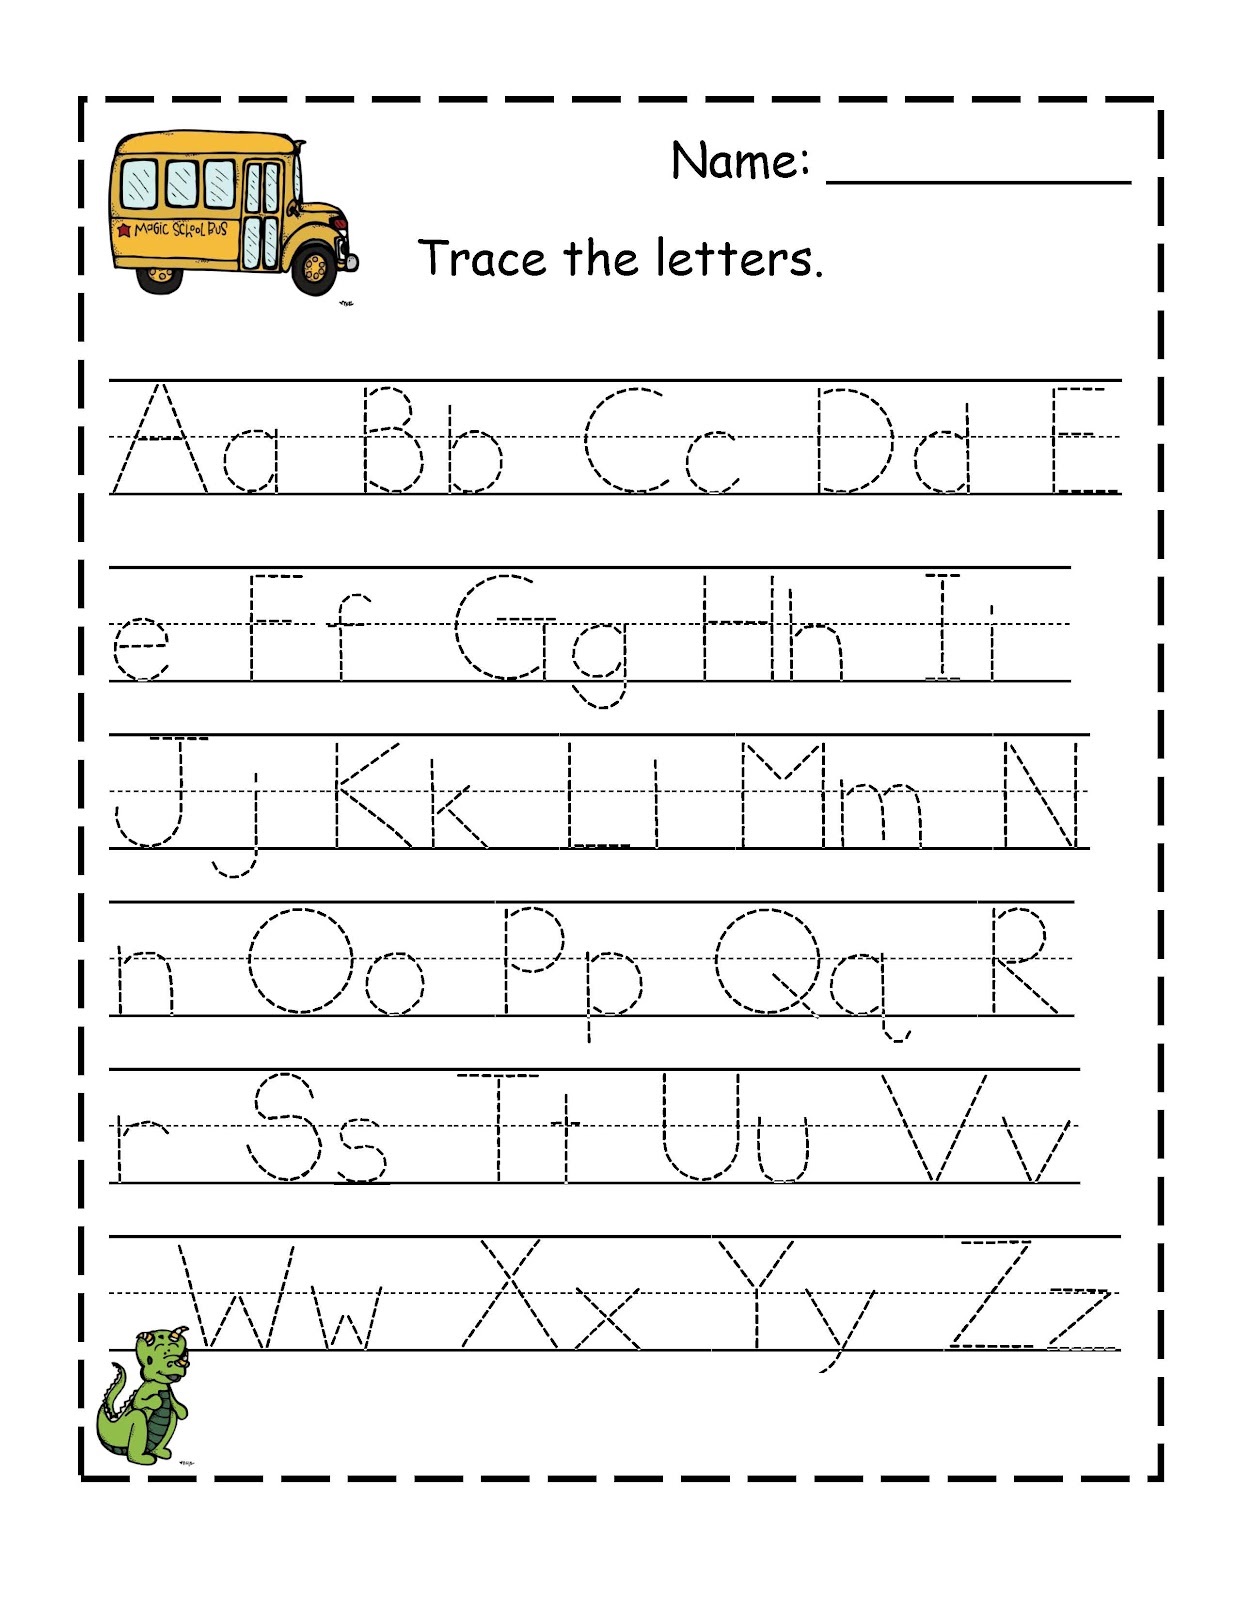 traceable letters worksheets for kids